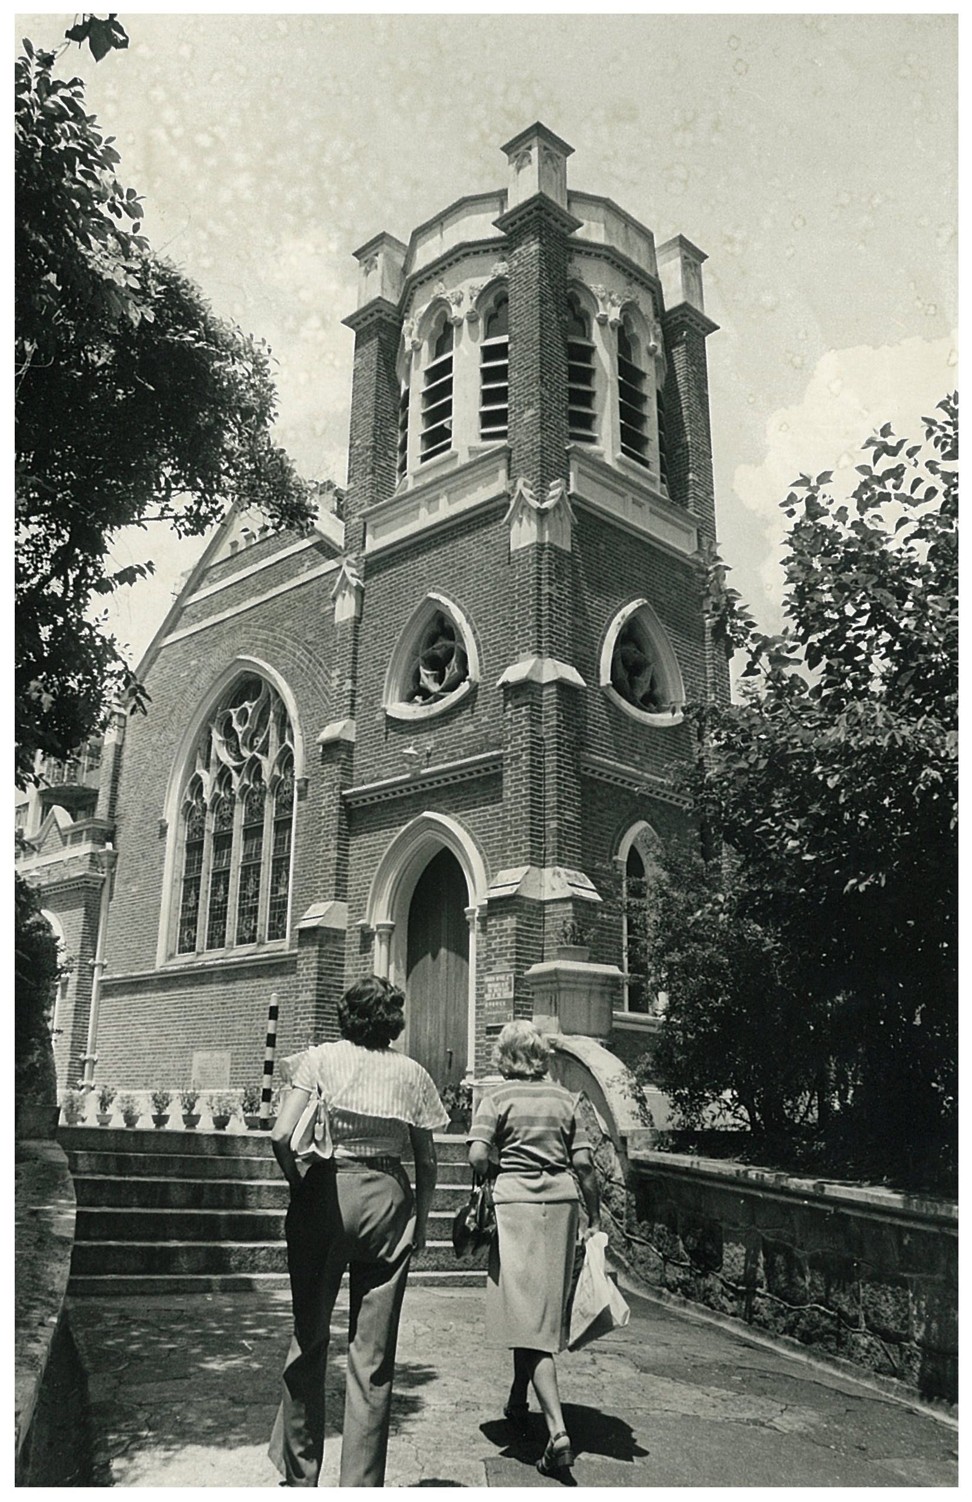 St Andrew’s Church in 1966. Photo: K.Y. Cheng